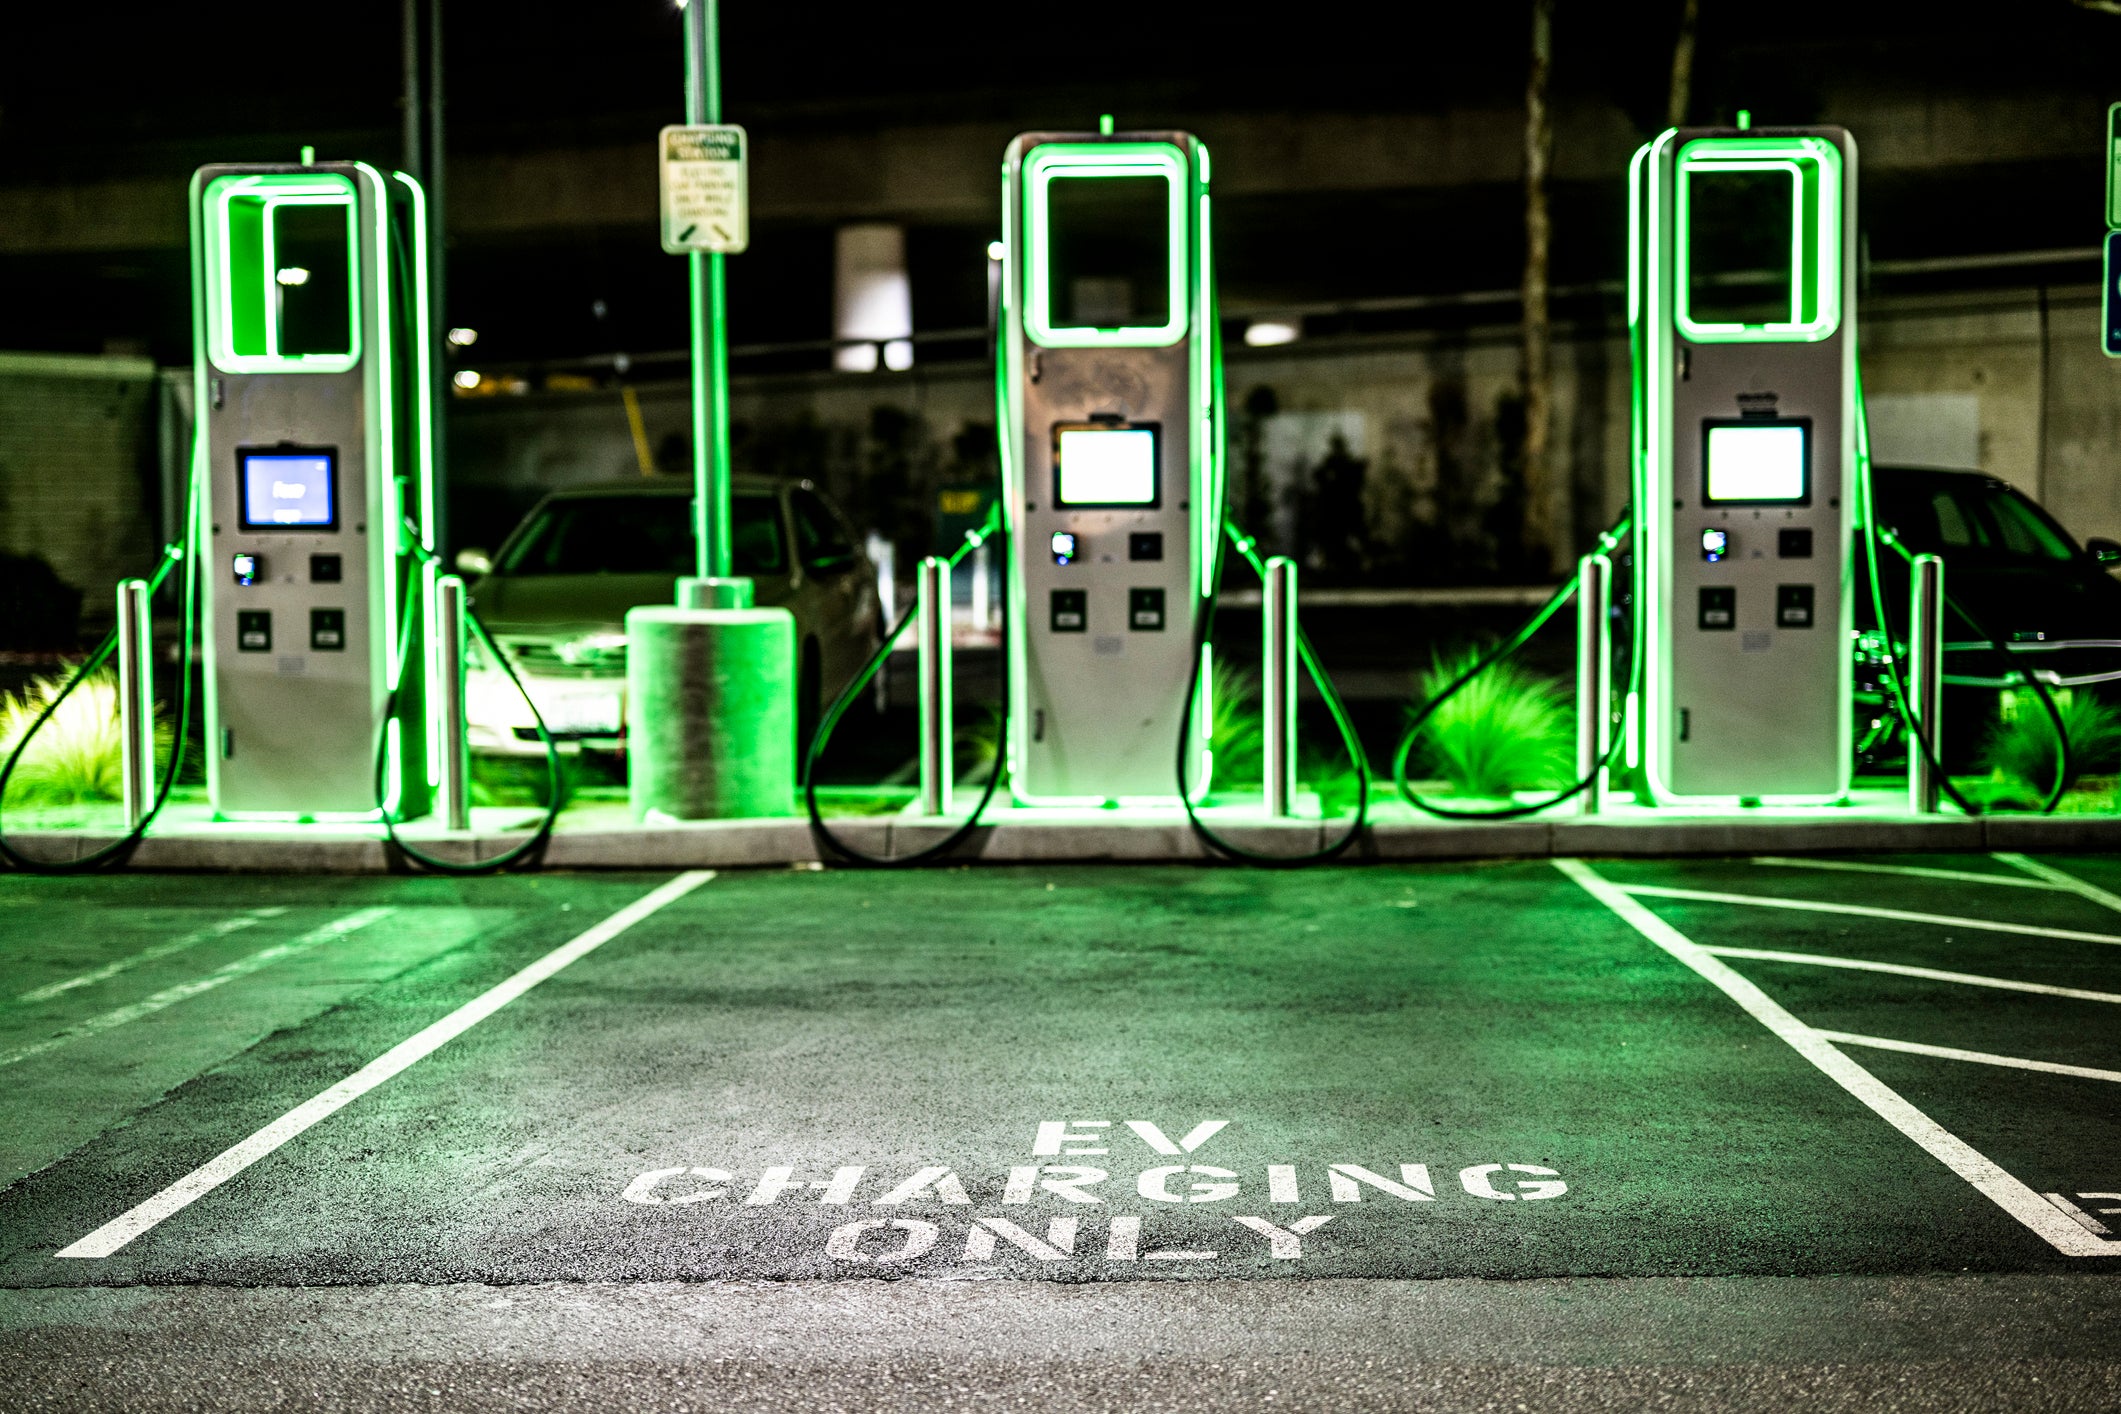 It’s not easy being green... the number of public charging points has failed to keep pace with the growth of electric cars